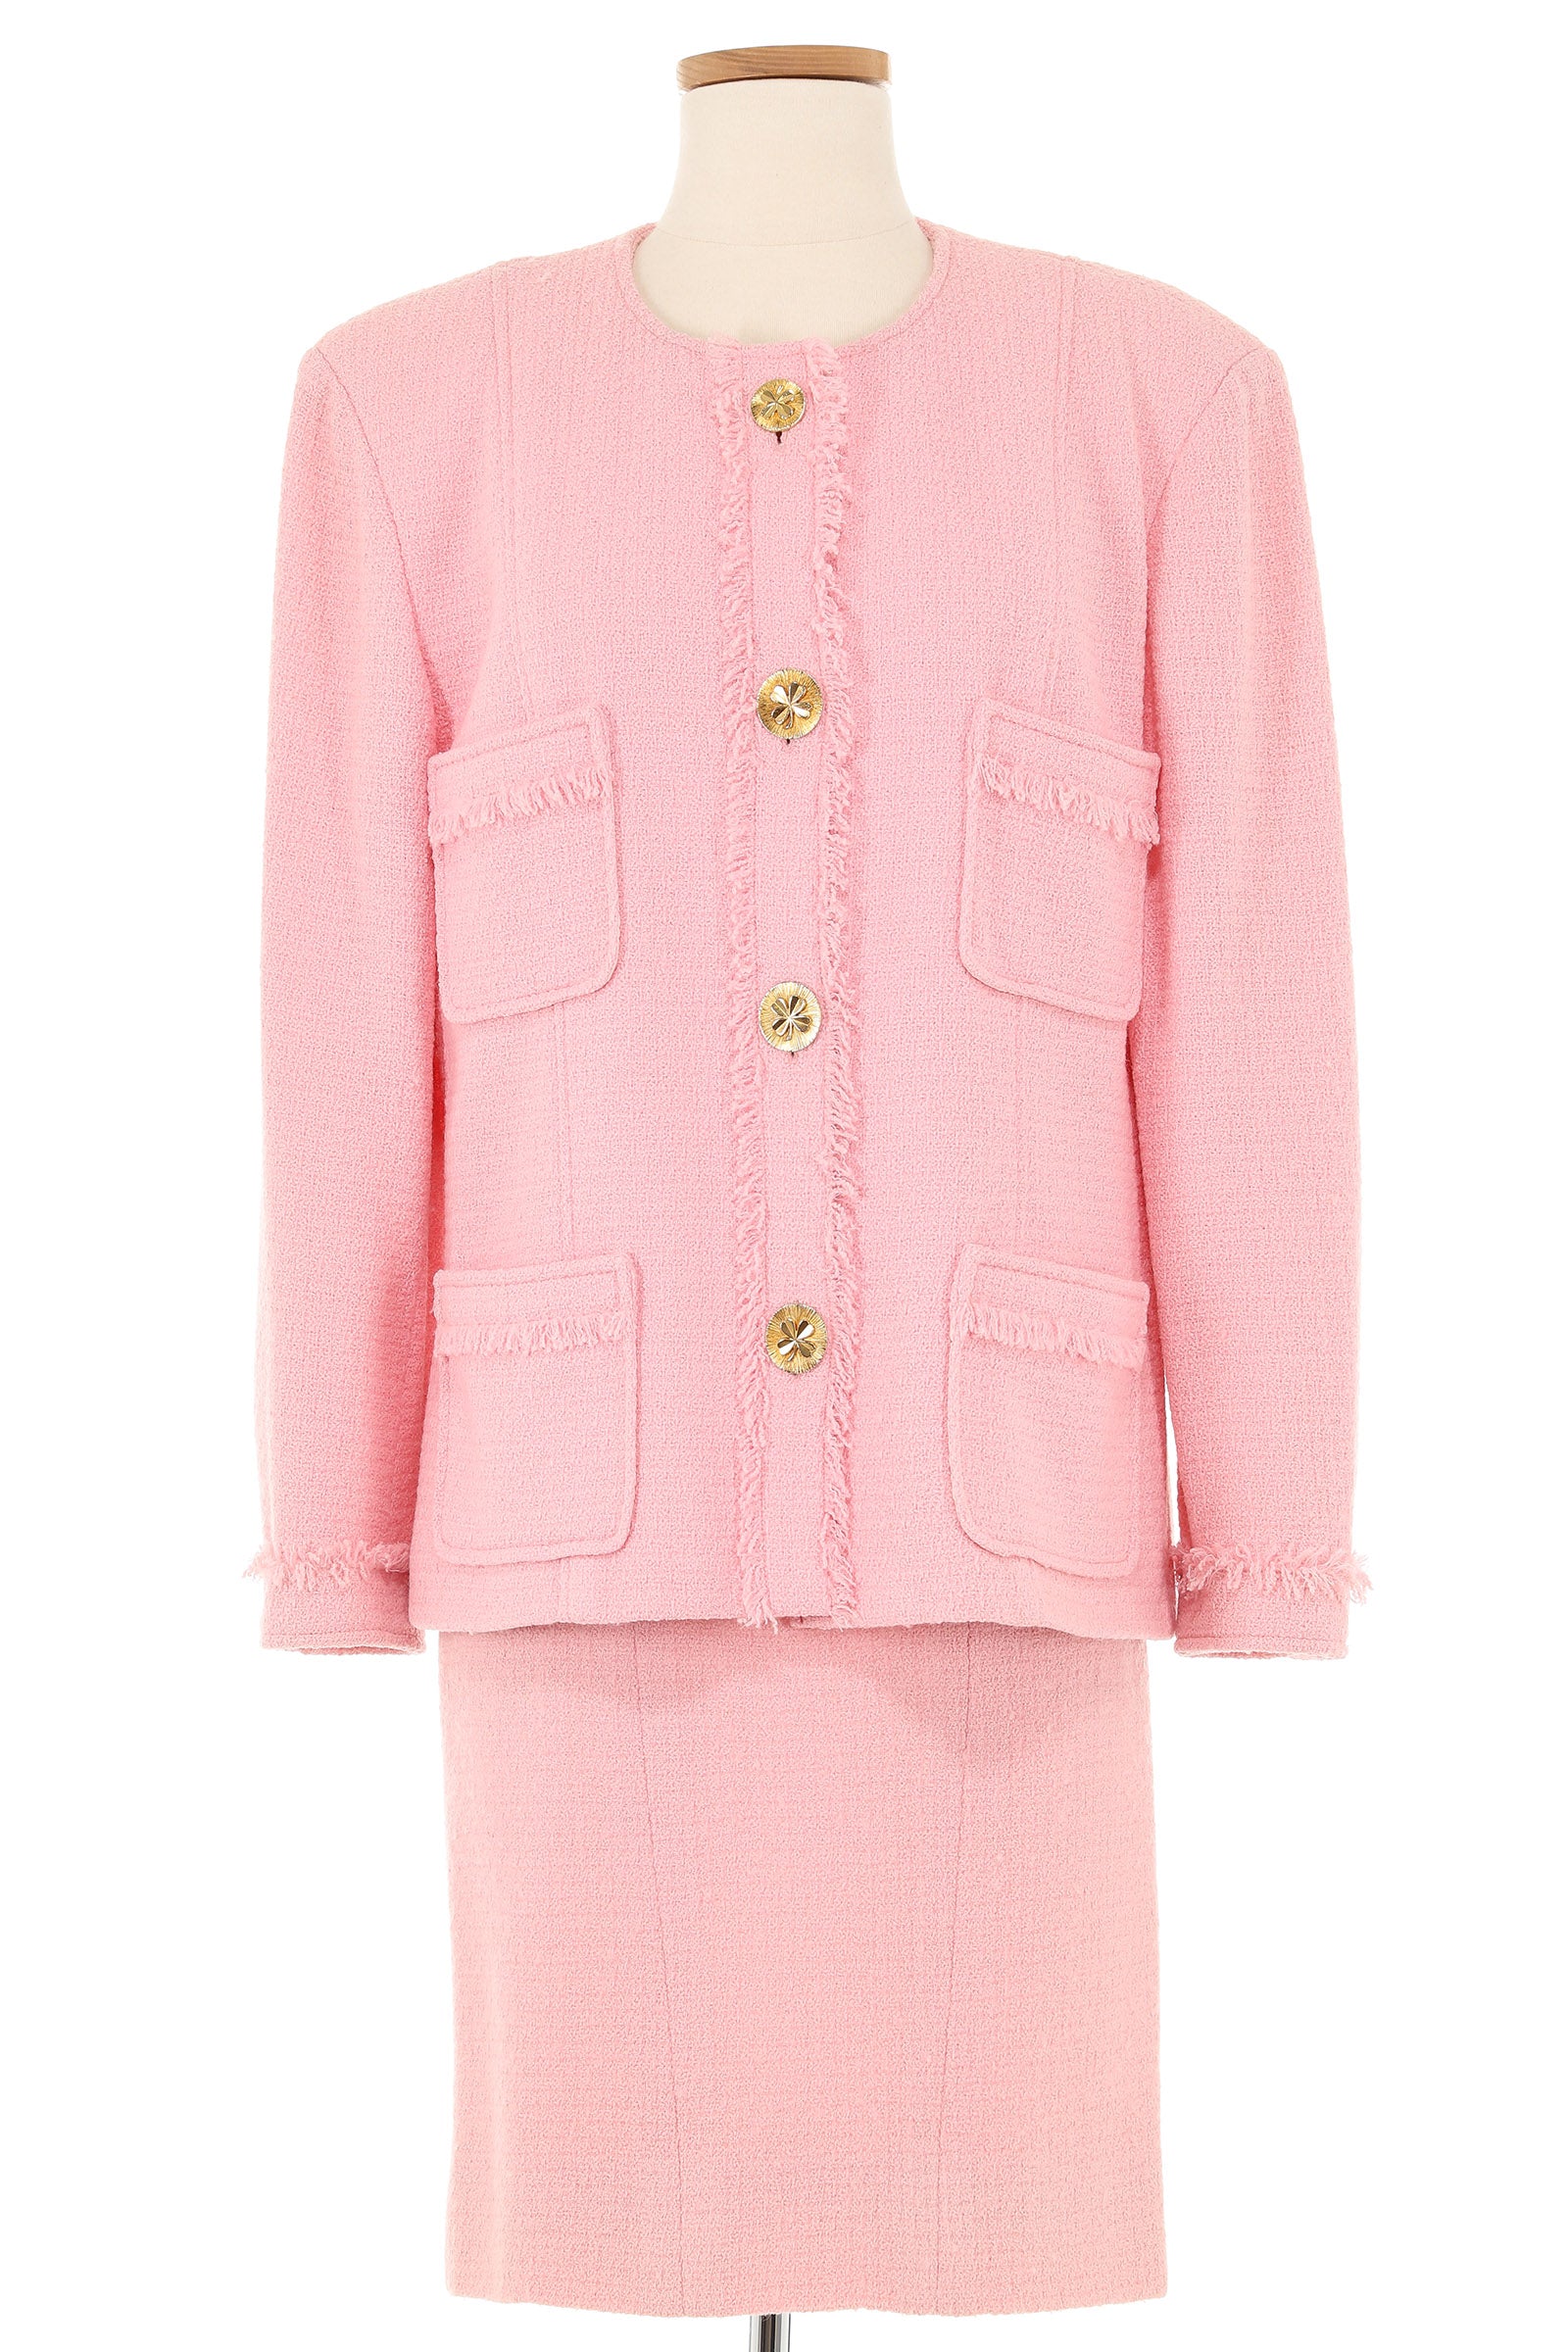 Chanel Fall 1990 Pink Skirt Suit with Clover Buttons – Vintage Grace